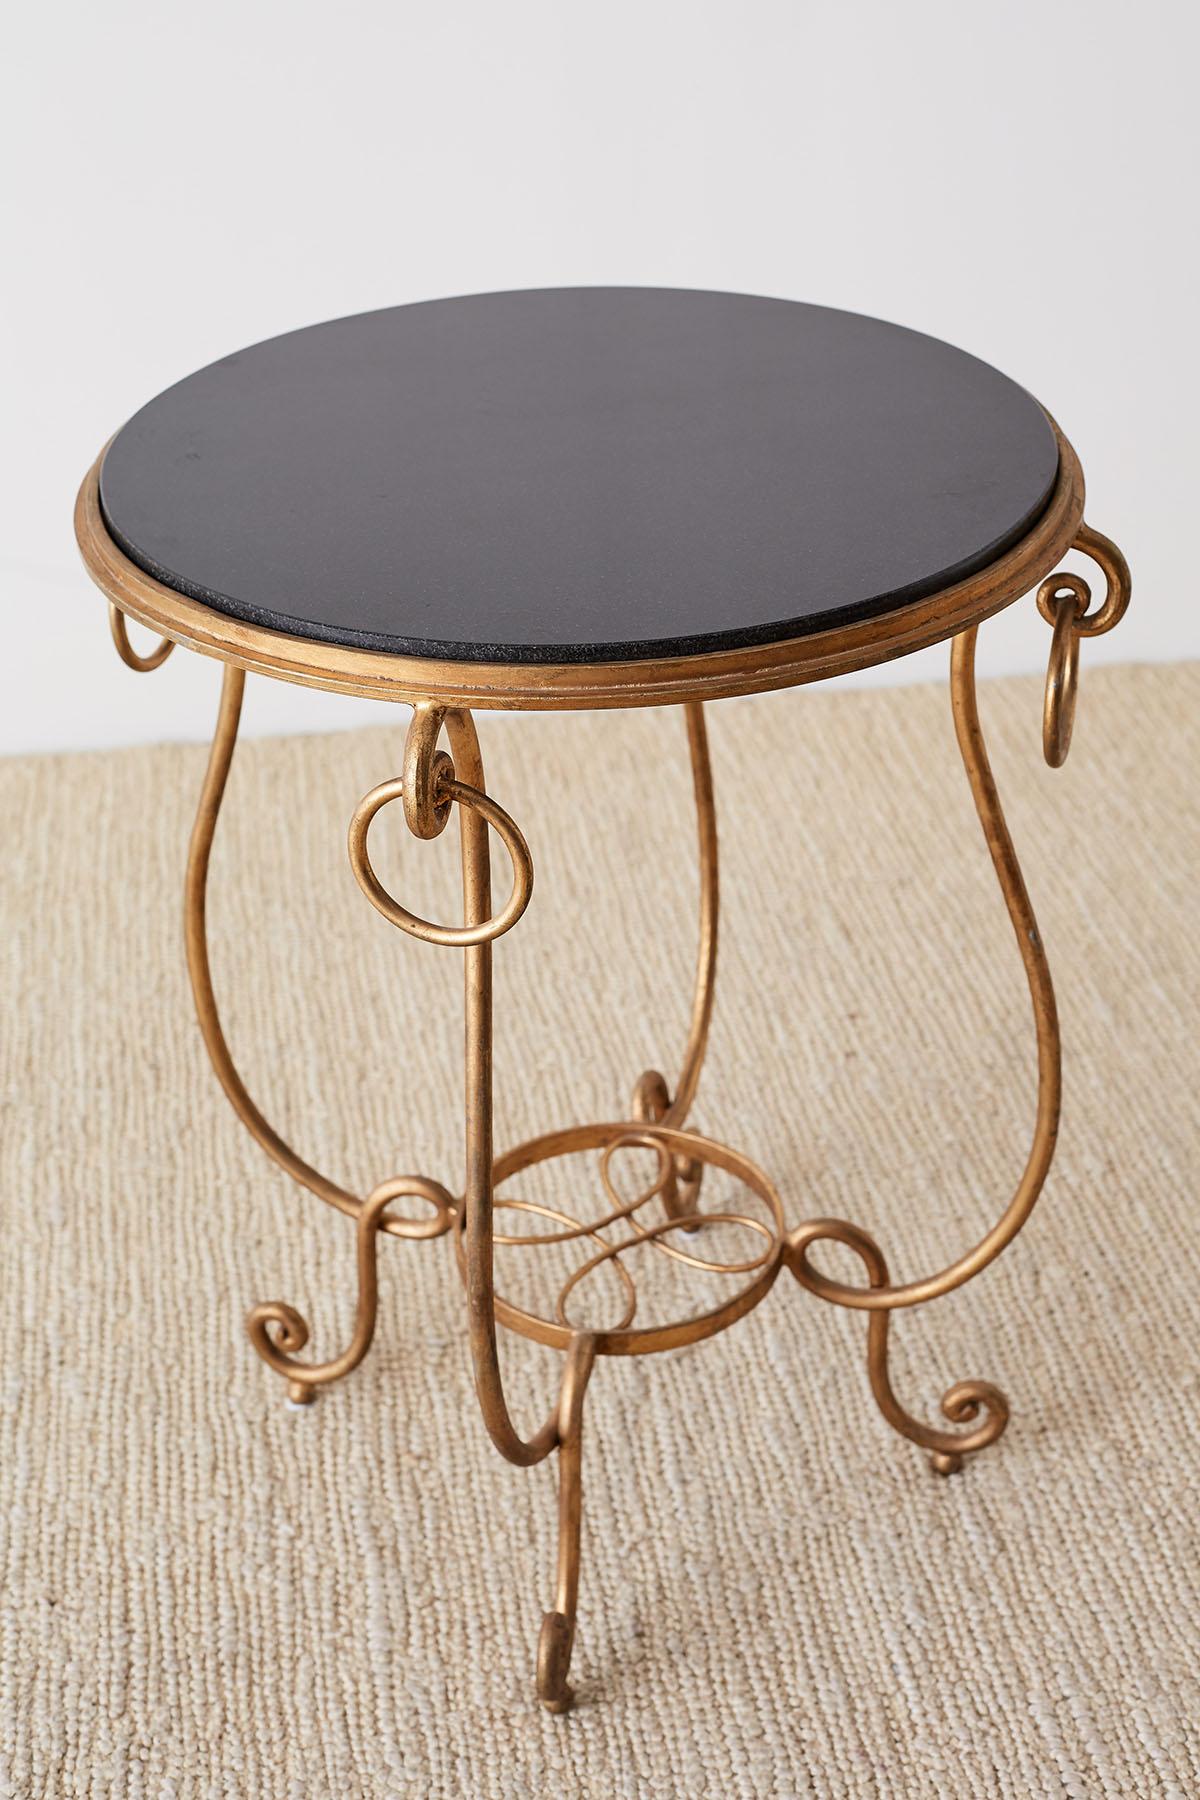 Hollywood Regency Rene Drouet Style Gilded Iron and Granite Table For Sale